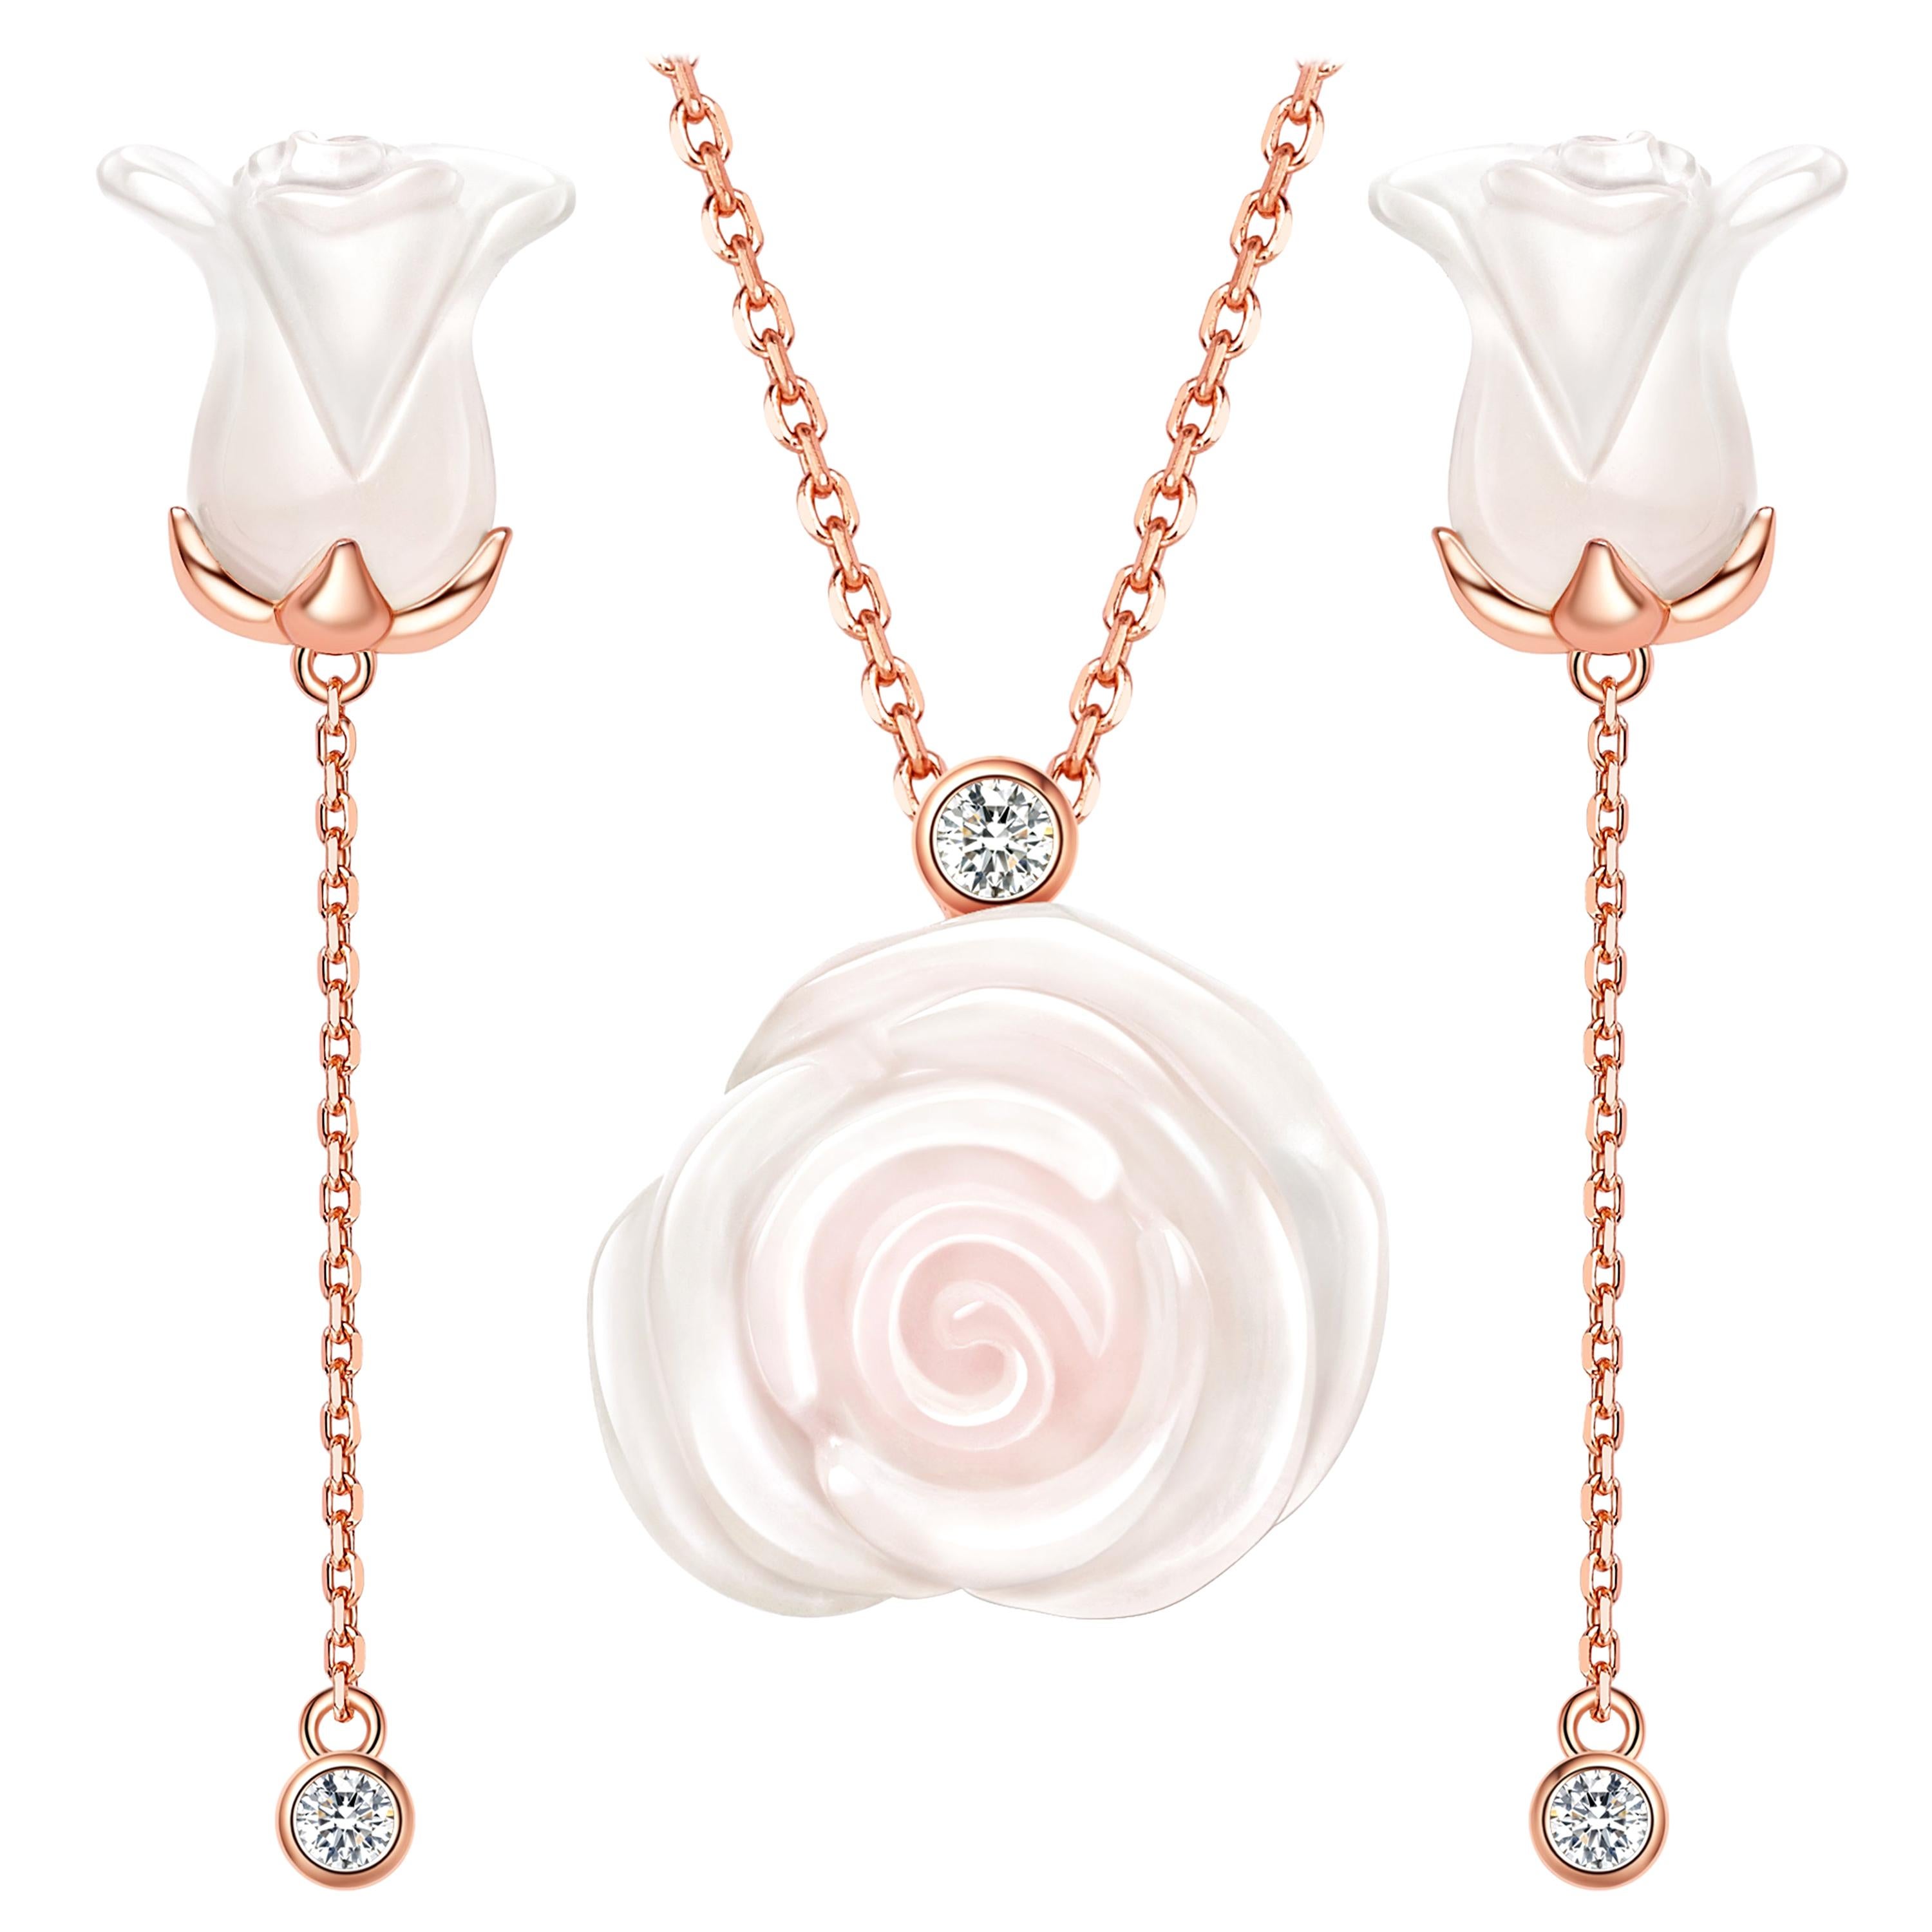 Fei Liu Chalcedony Rose Necklace and Earrings Set in Rose Gold Plated Silver